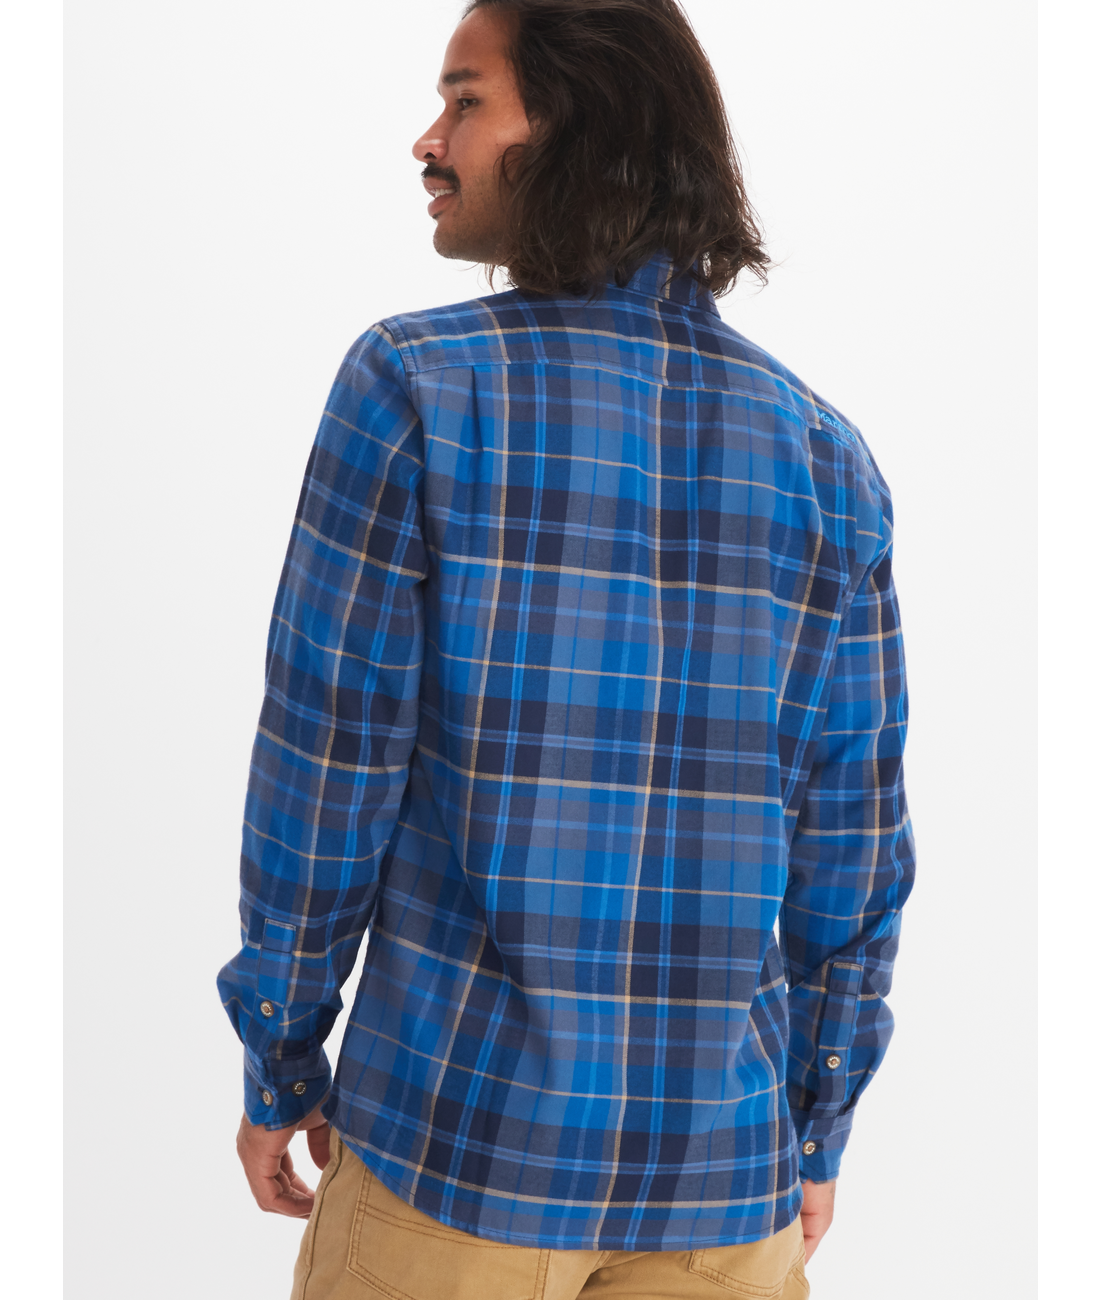 Anderson LW Flannel